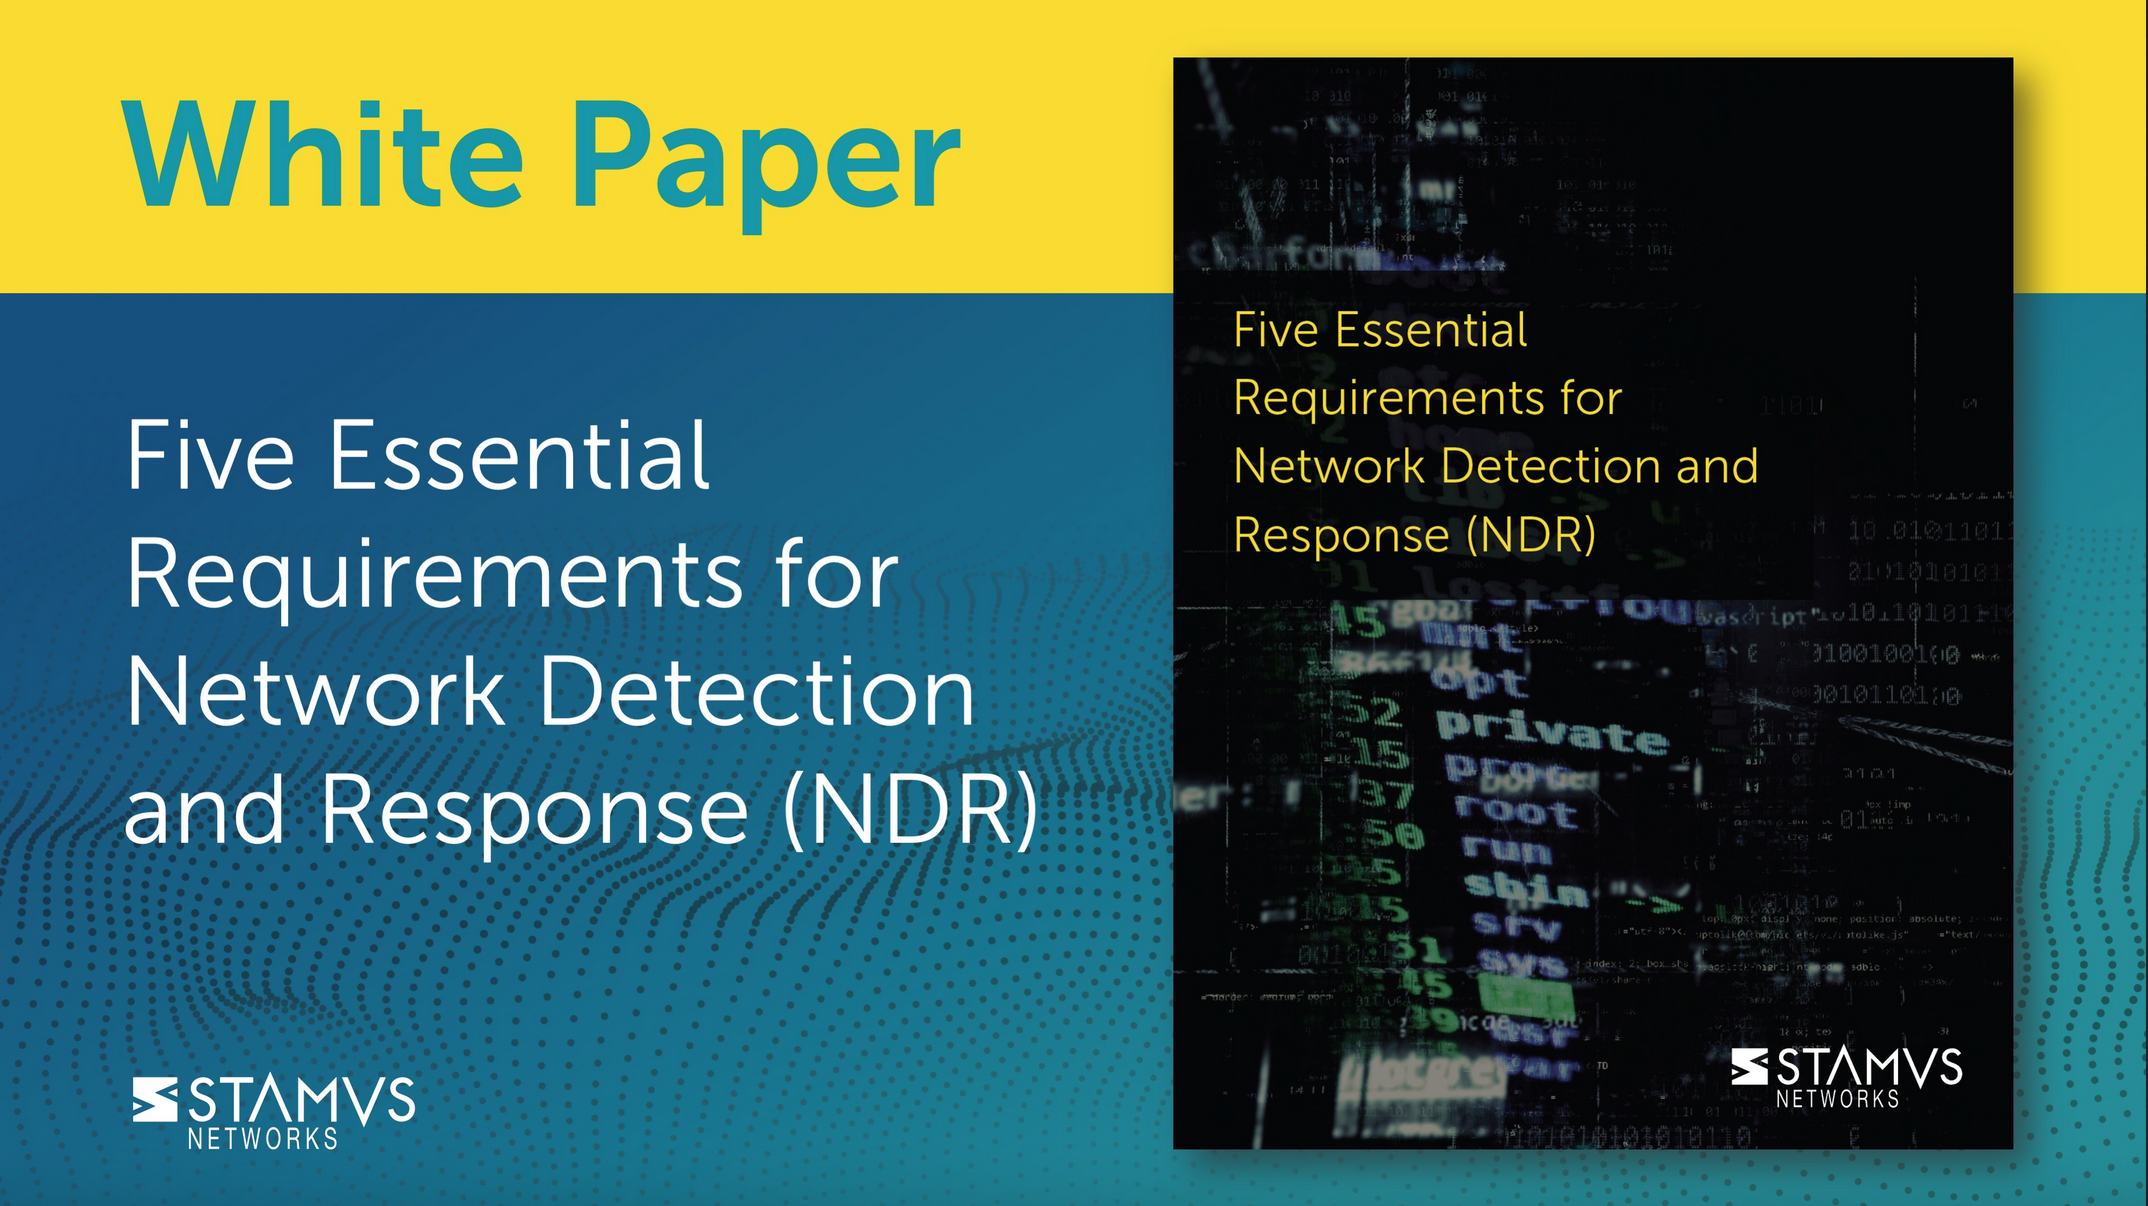 Five Essential Requirements for Network Detection and Response (NDR)